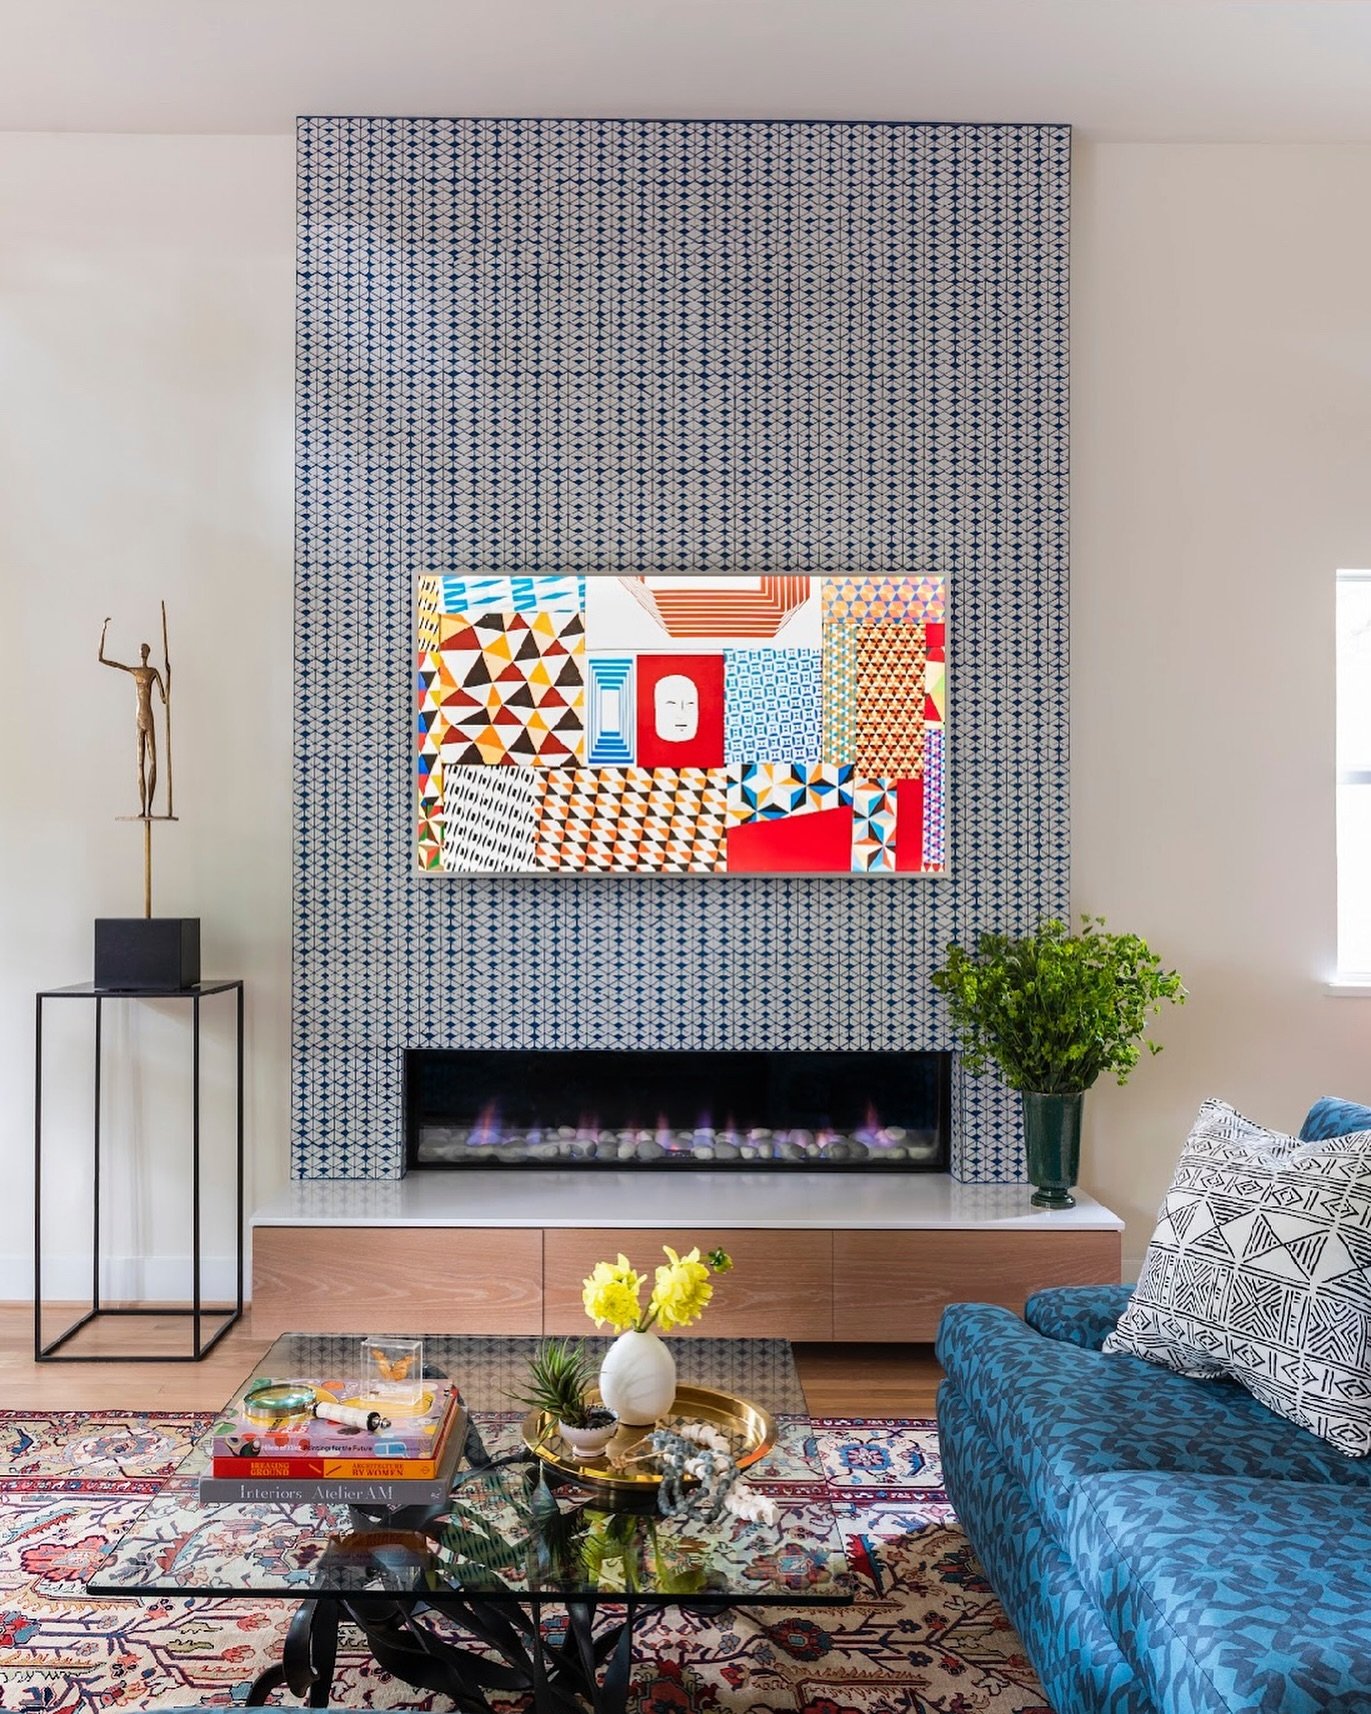 A family room that is subtle yet so interesting.💙&nbsp;We introduced pattern on the fireplace in the form of beautiful tile to bring continuity into the design. 

🌈Design by @emilyjunedesigns
📷Photography by @ccasbo for @juliesoefer